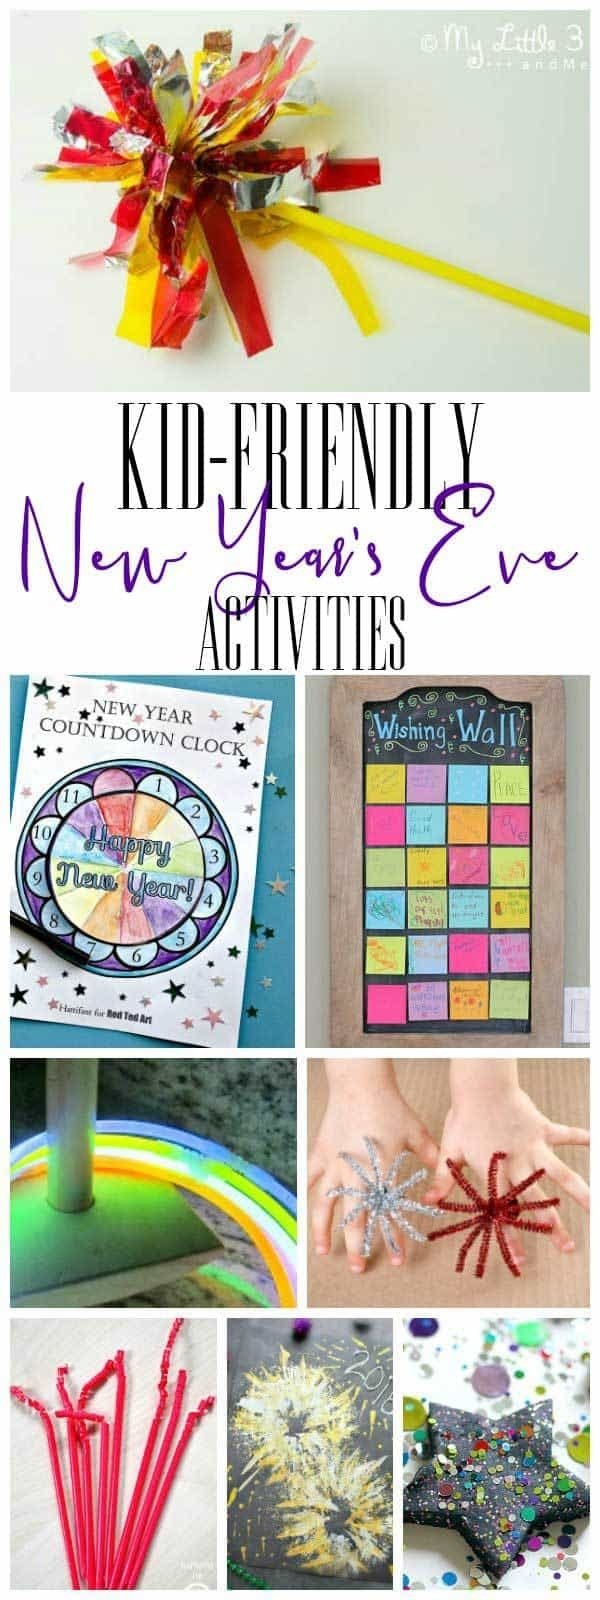 10 Cute New Years Eve Ideas For Families kid friendly new years eve activities for family celebrations 2023